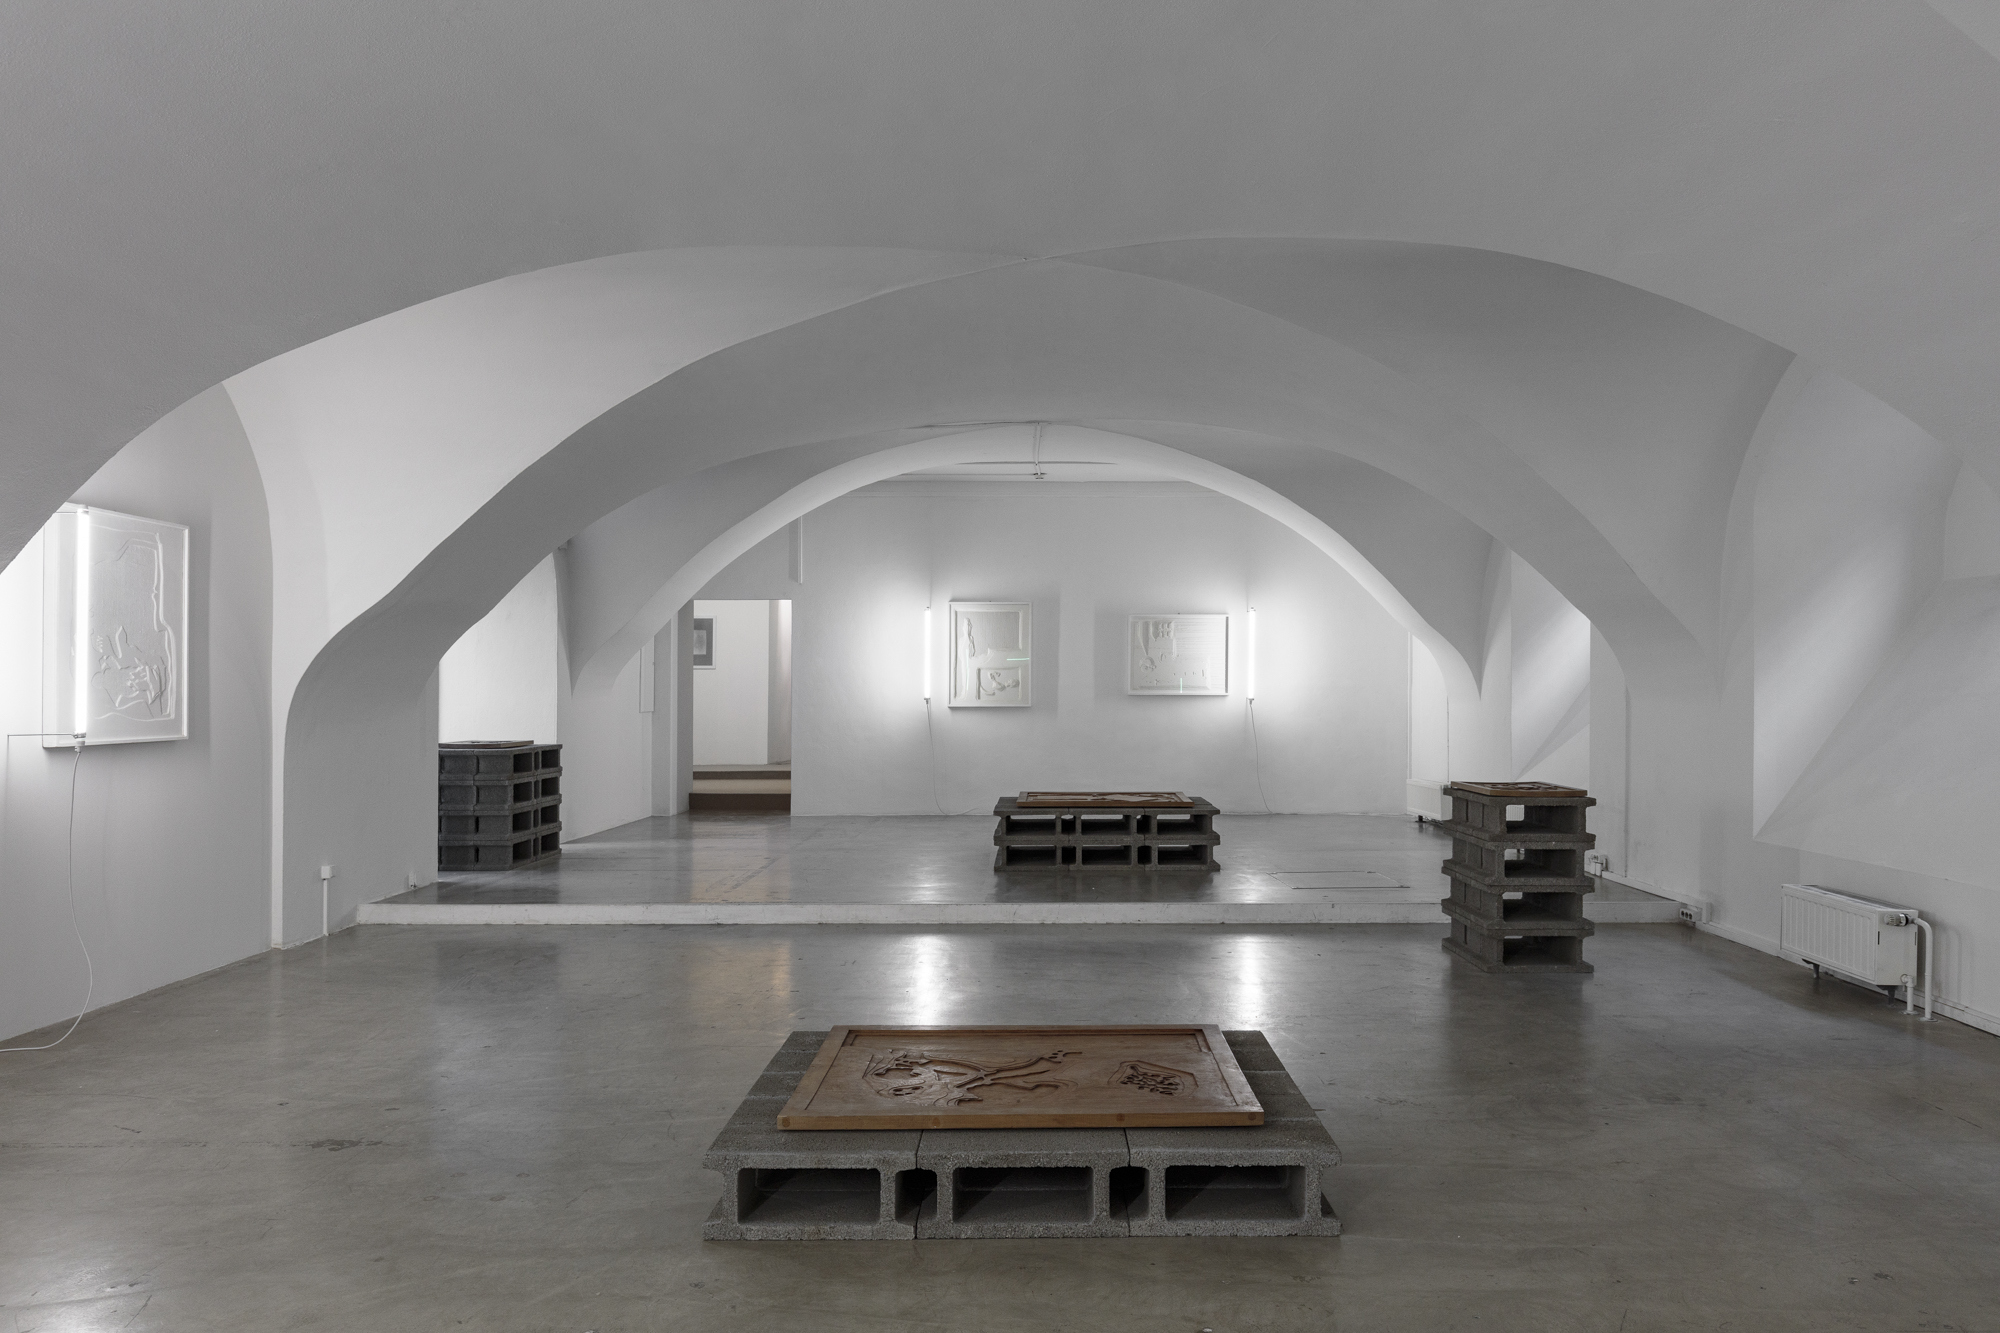 Ezio Gribaudo, The Weight of the Concrete, in a scenography by Davide Stucchi at Grazer Kunstverein, 2023. Courtesy: the Archivio Gribaudo, Davide Stucchi and Grazer Kunstverein. Photo: kunst-dokumentation.com